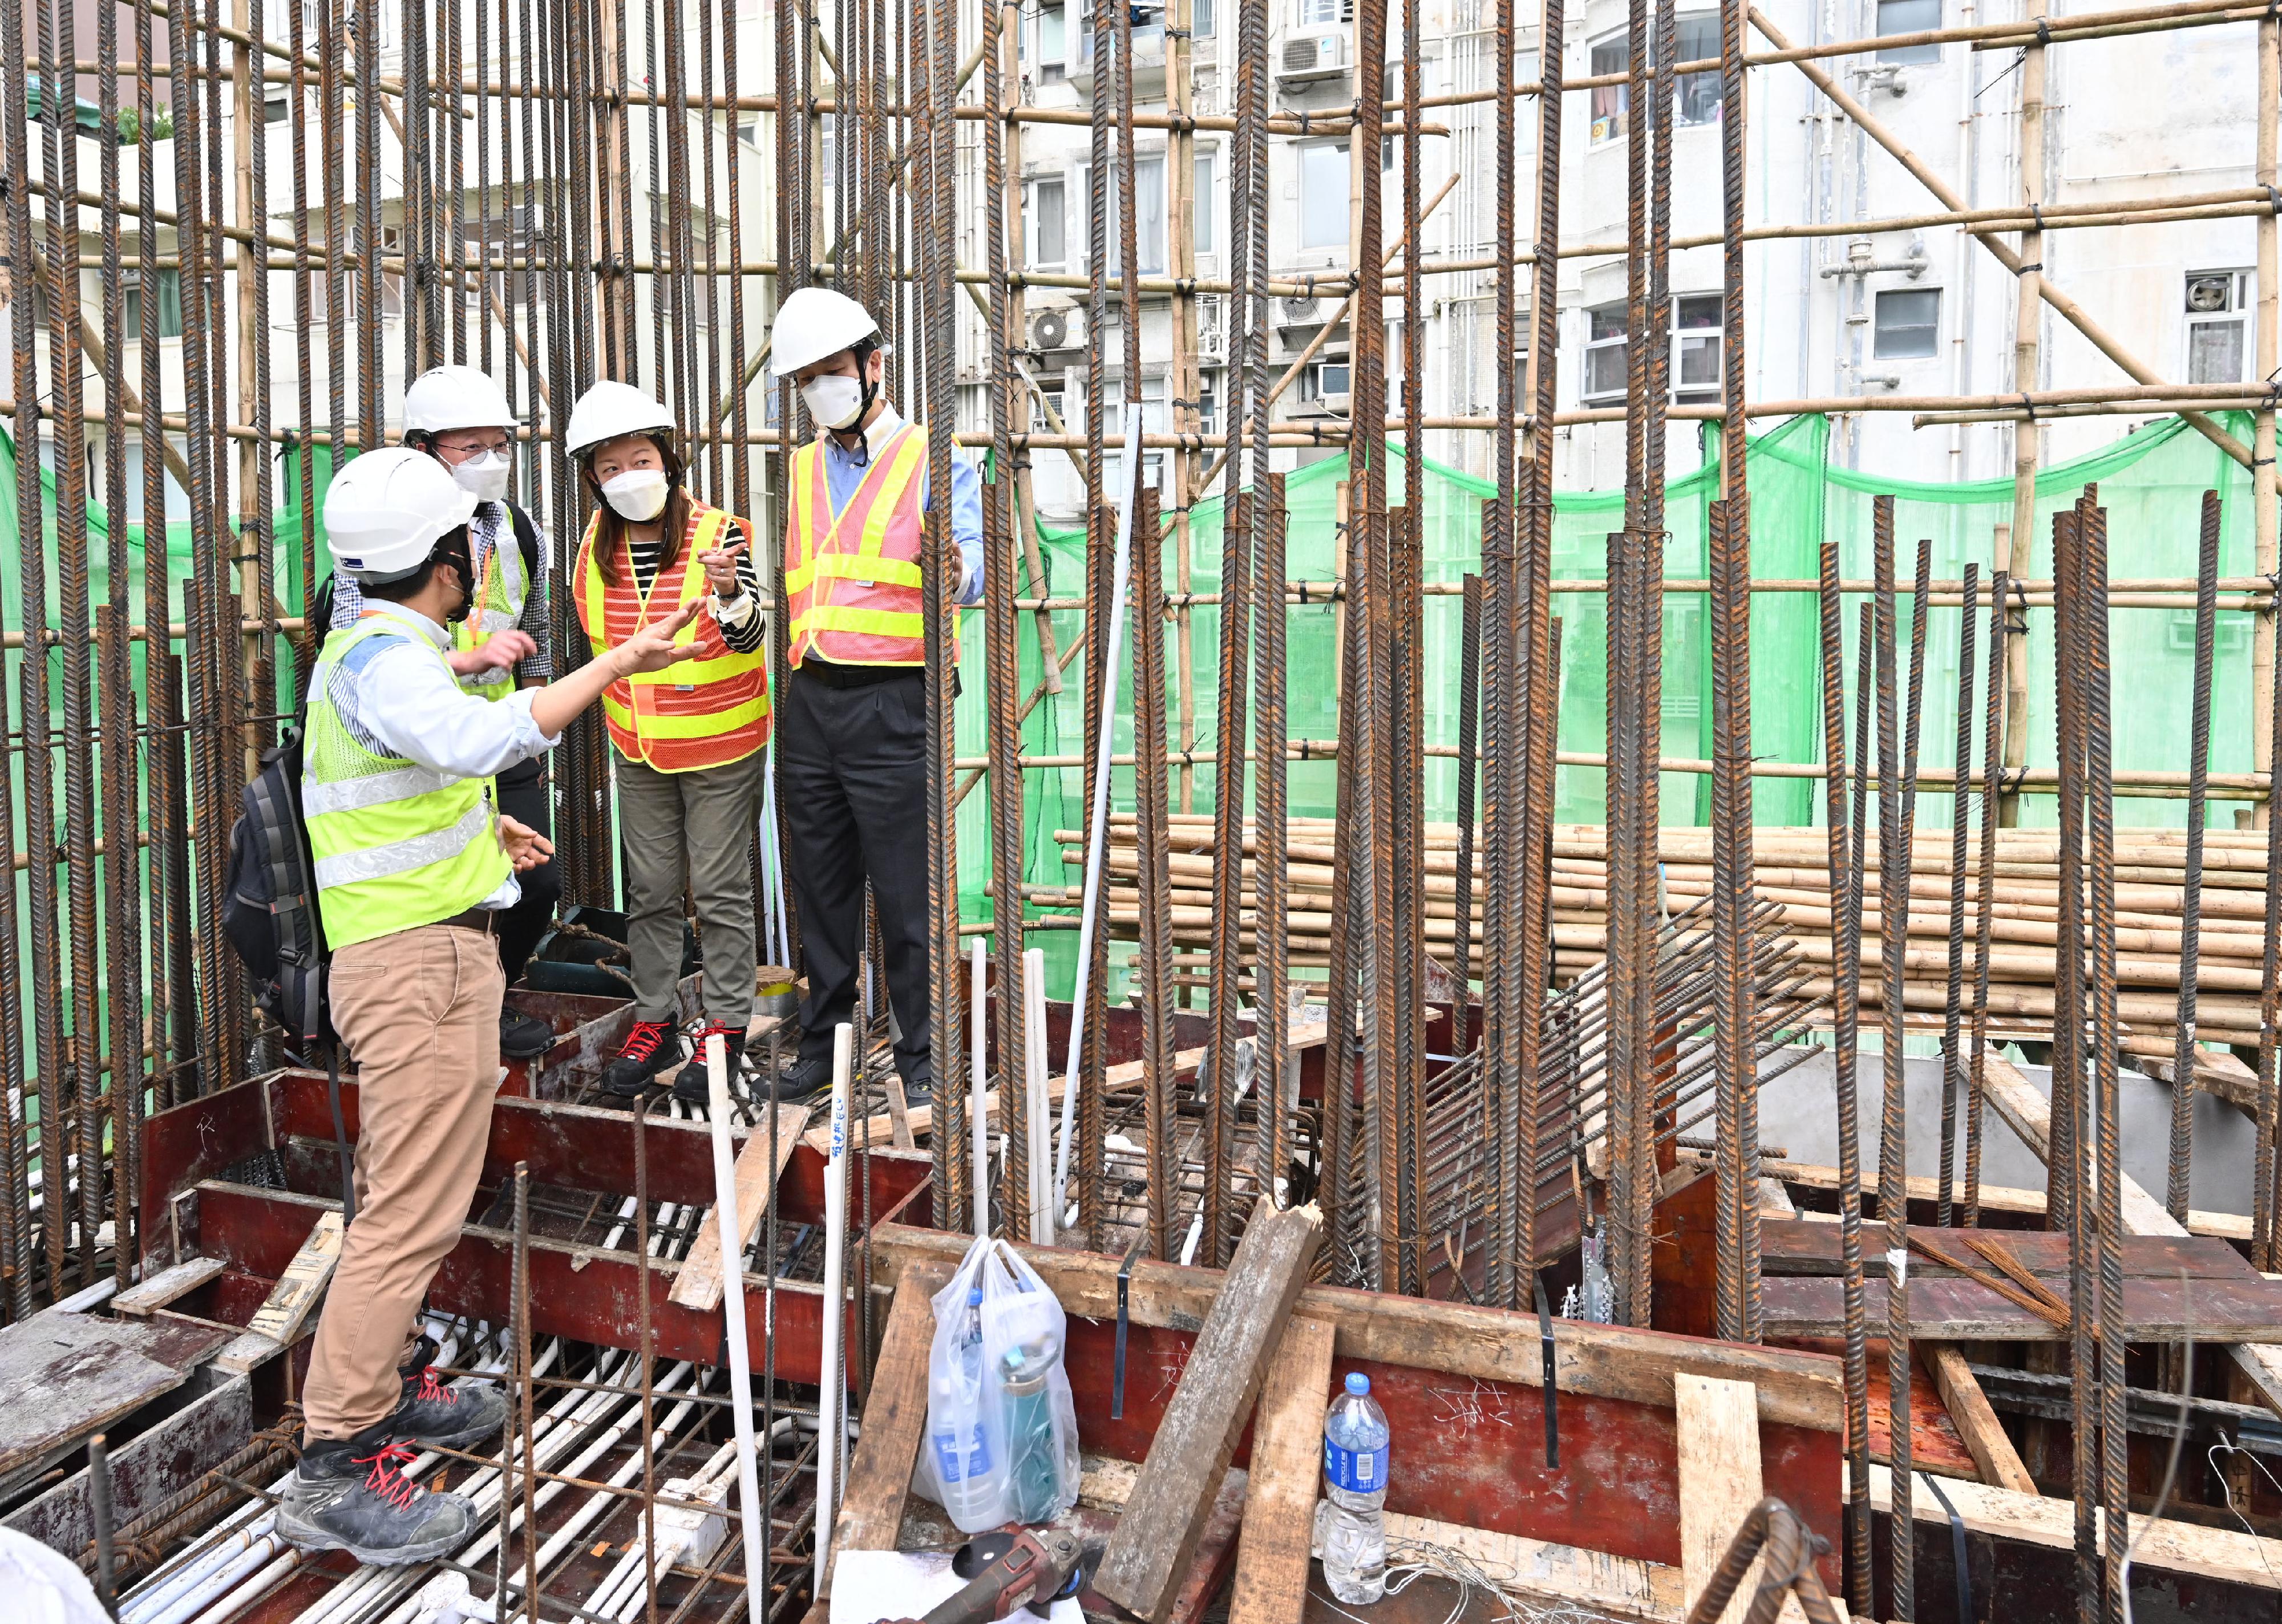 The Labour Department concluded a special enforcement operation targeting construction sites of new works and work-at-height safety to curb unsafe work practices on construction sites in November. Photo shows the Commissioner for Labour, Ms May Chan (second right), and the Deputy Commissioner for Labour (Occupational Safety and Health), Mr Vincent Fung (first right), inspecting a construction site.